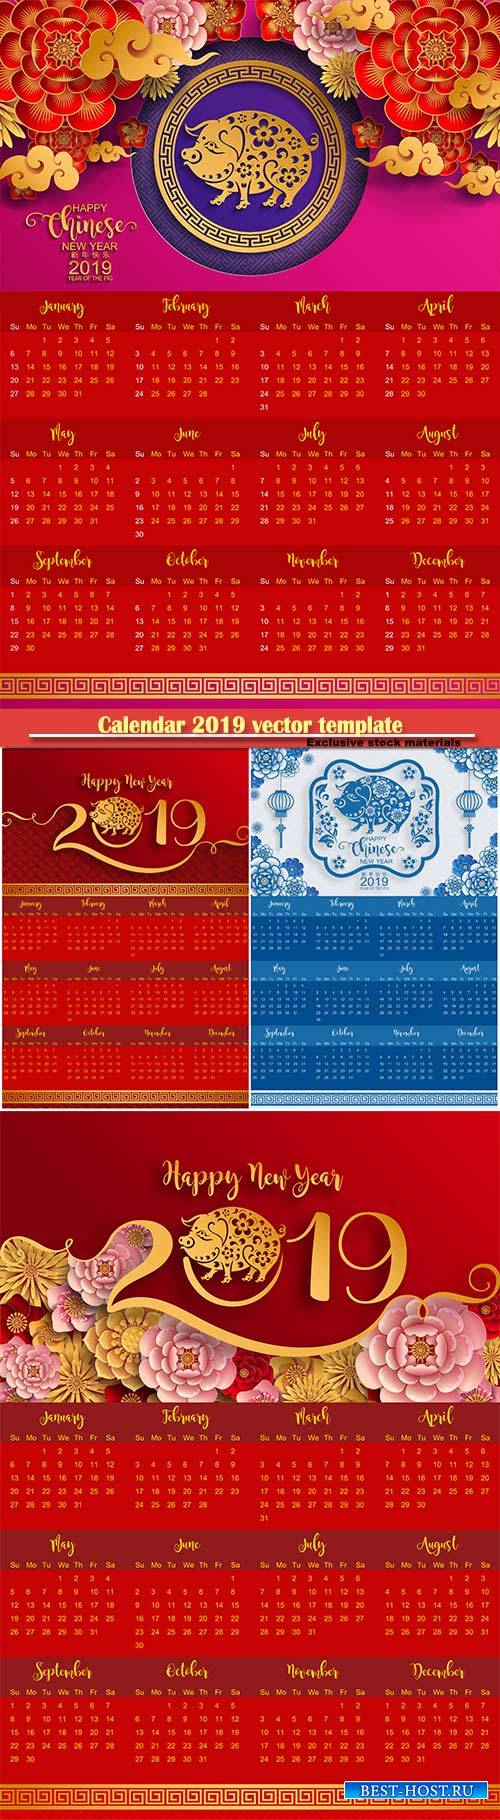 Calendar 2019 vector template, 12 months included